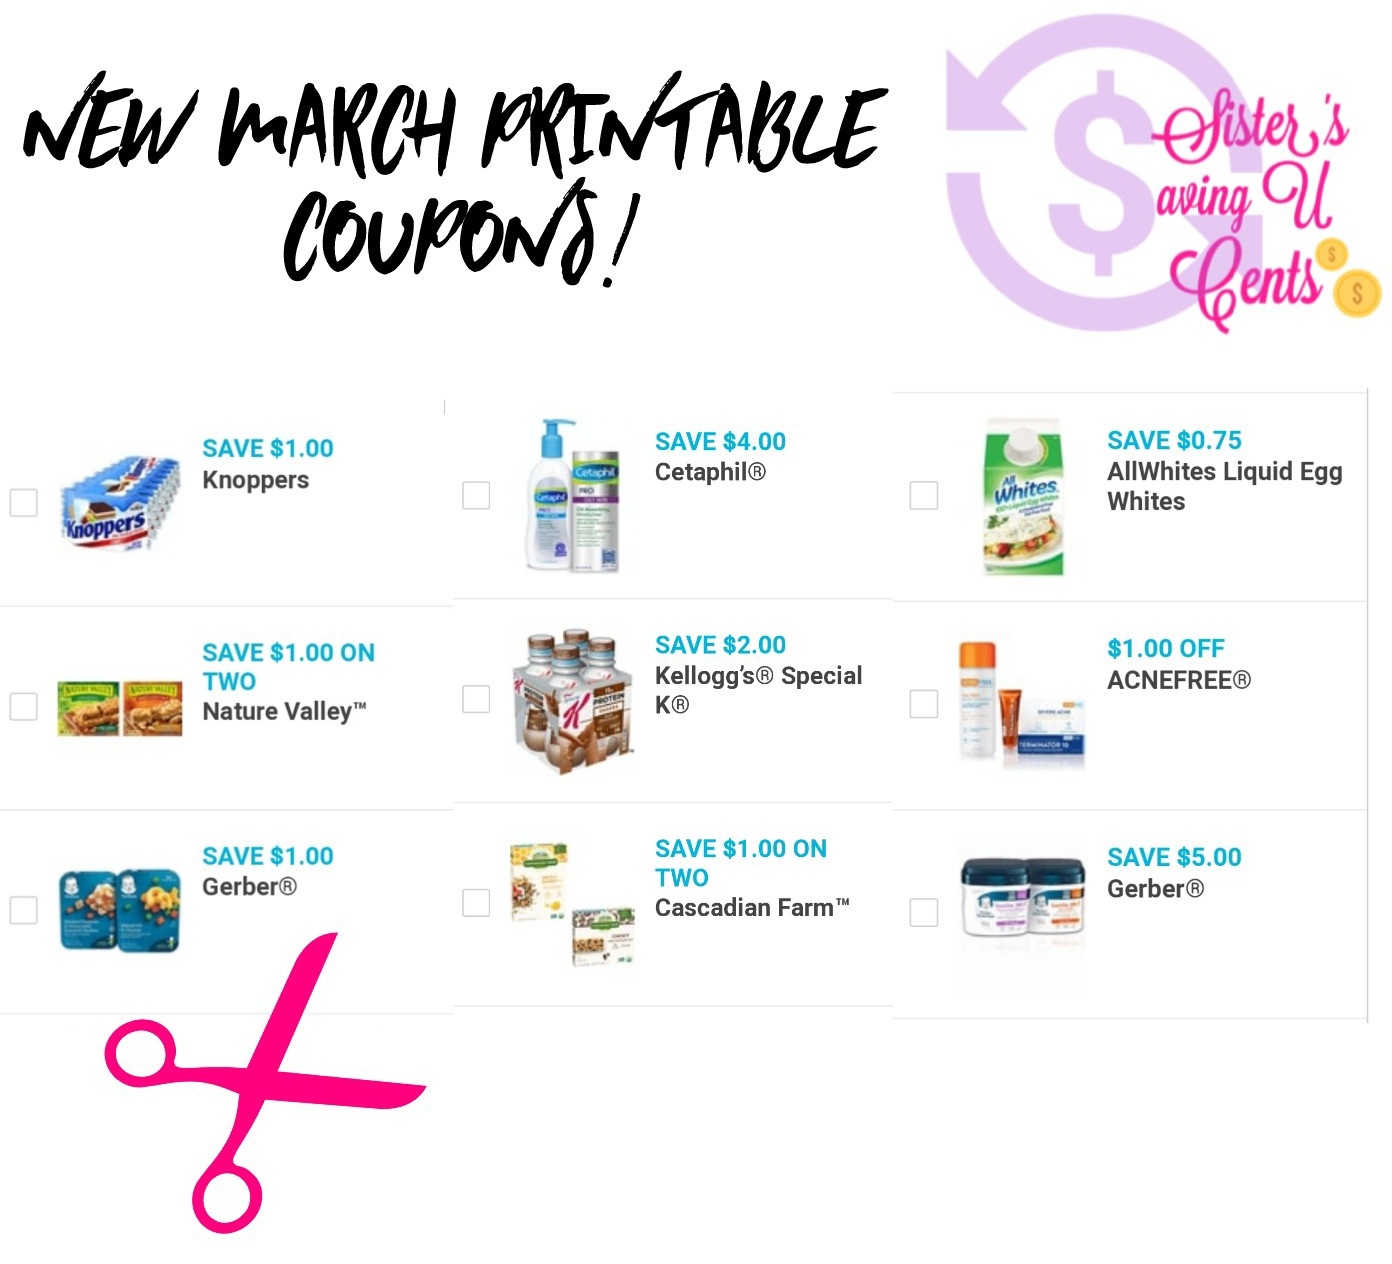 New March Printables Coupons!! - Acne Free Coupons Printable